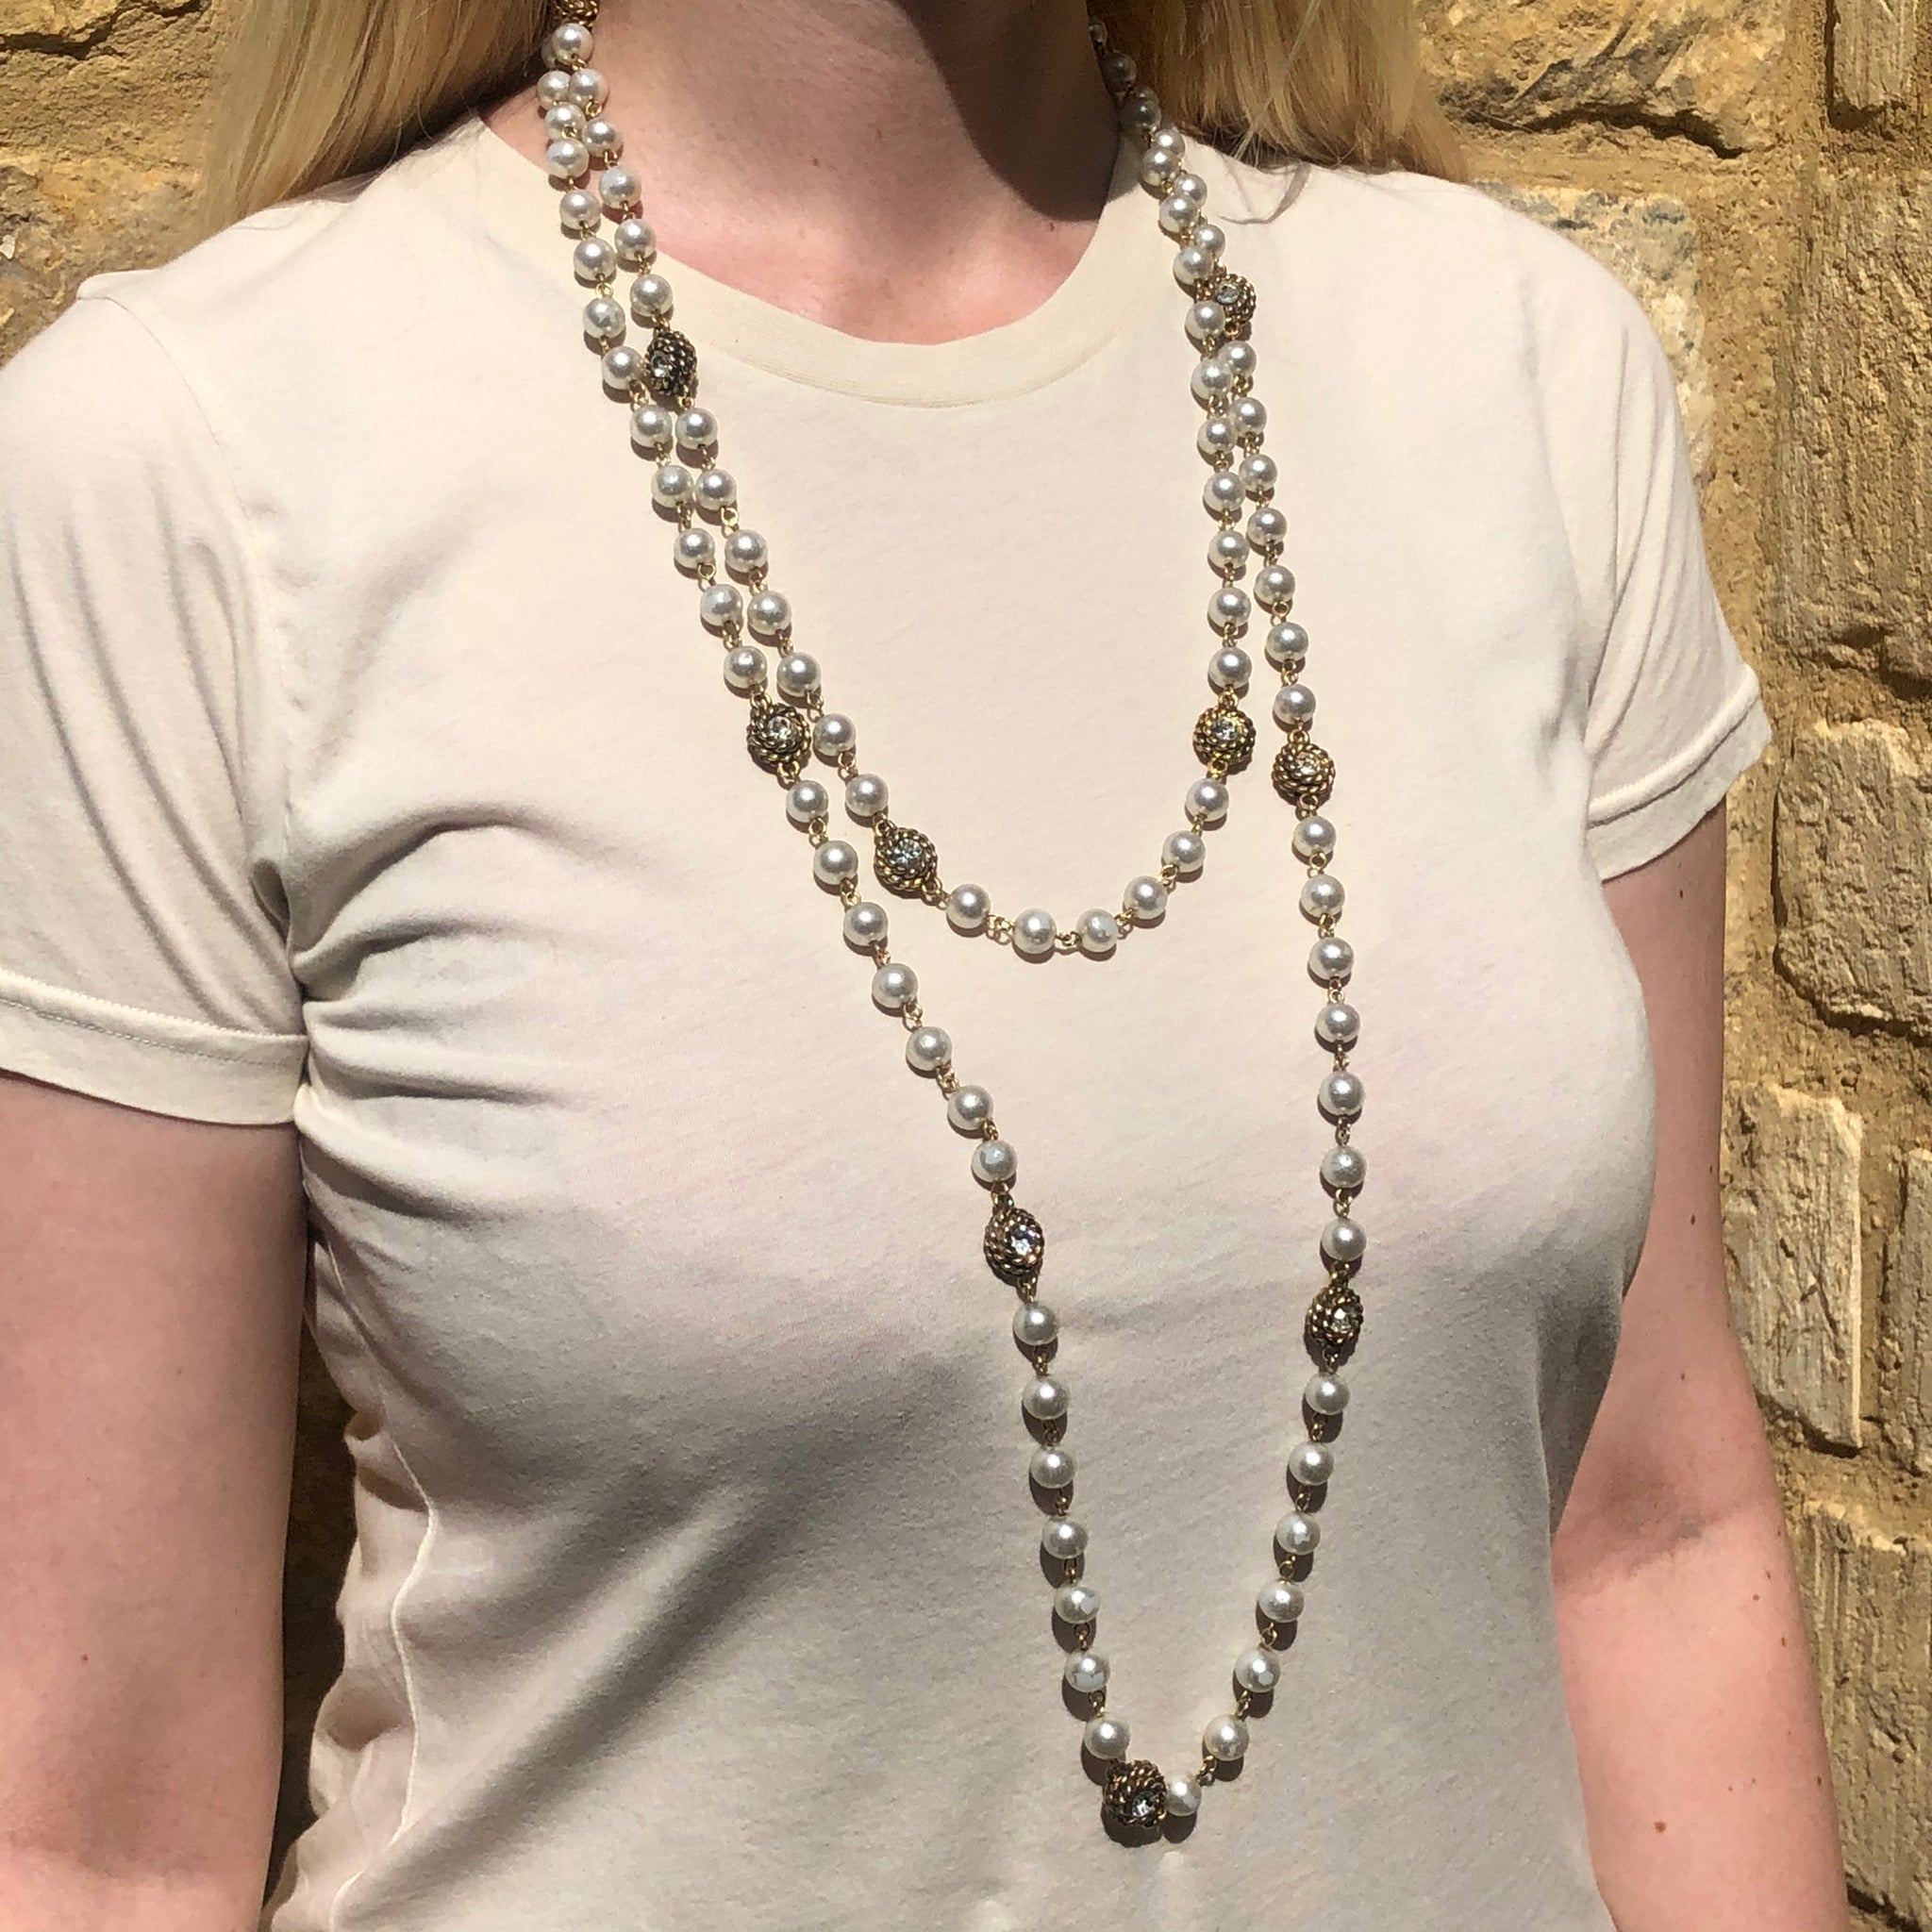 Chanel CC & pearls long necklace - 2010s second hand vintage – Lysis